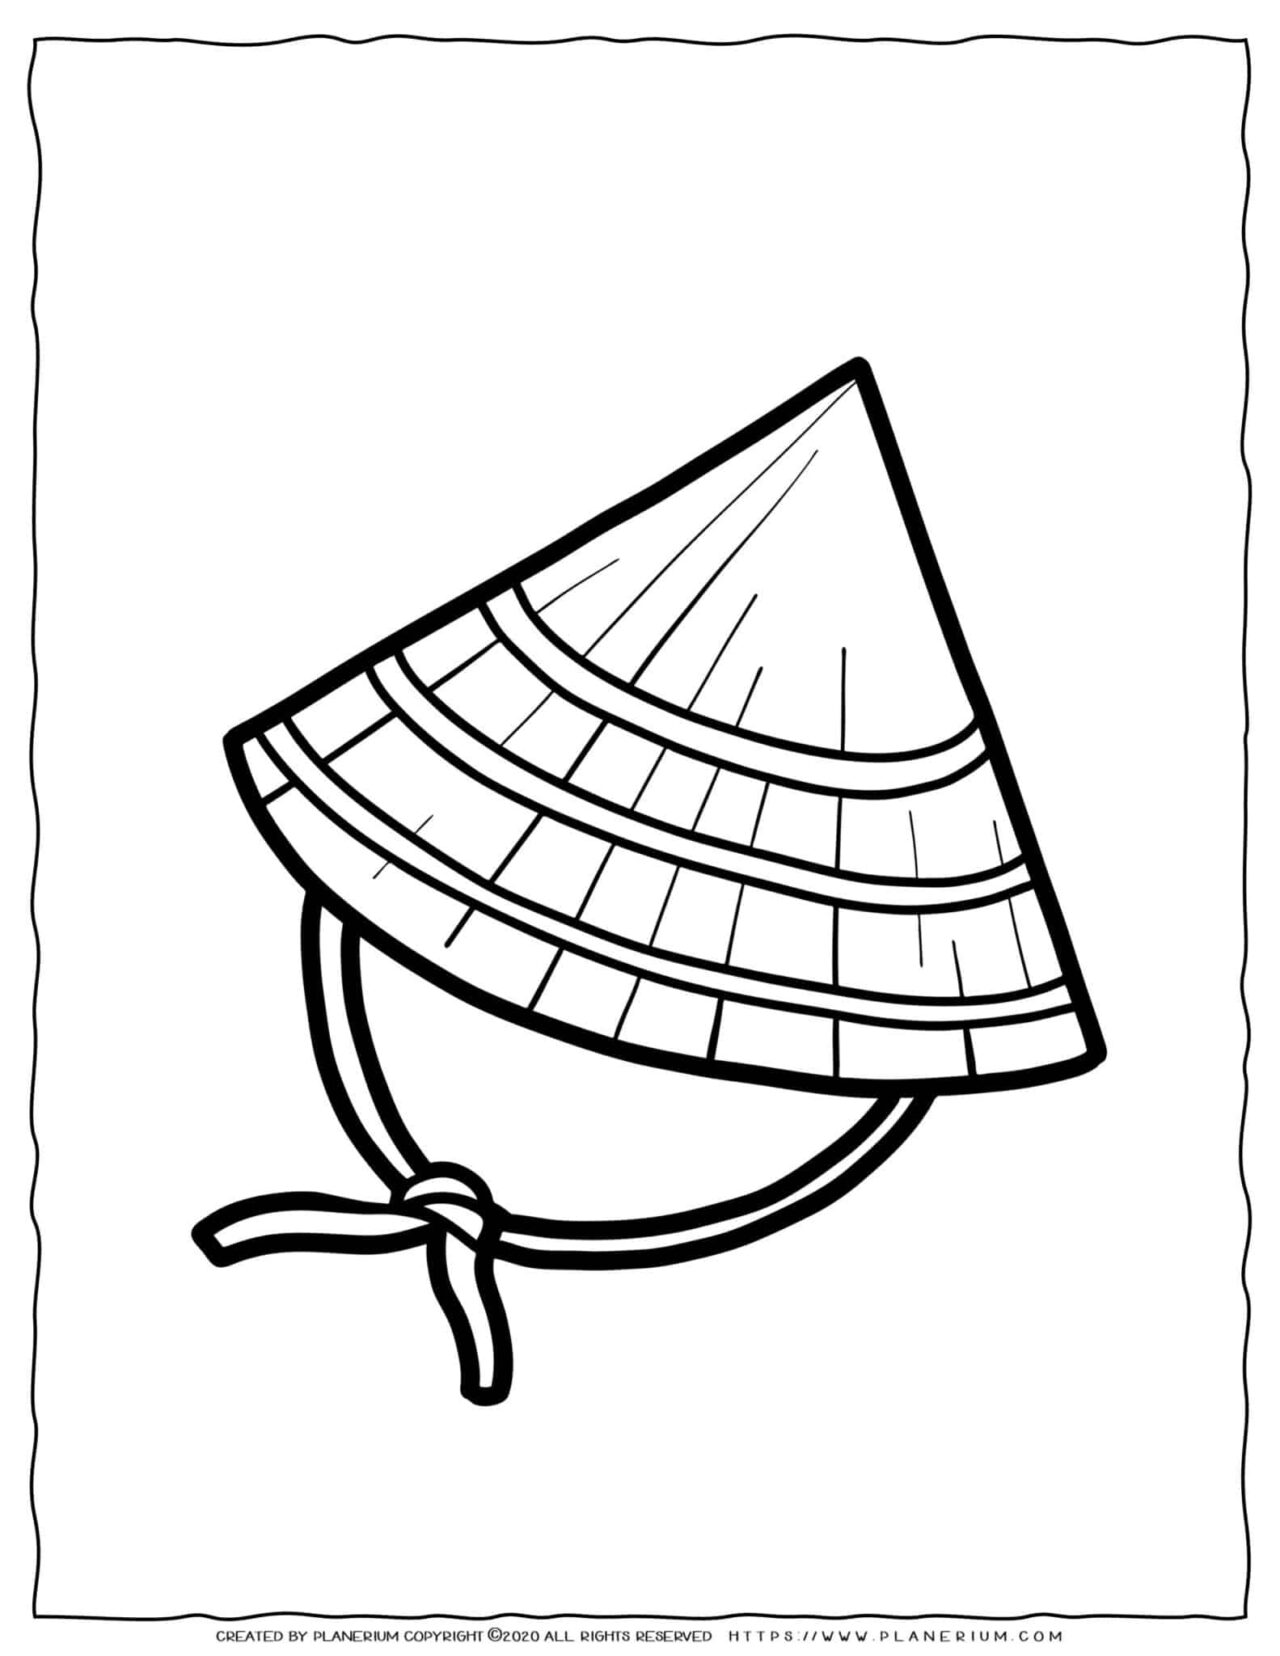 Clothes Coloring Page - Chinese Hat | Planerium